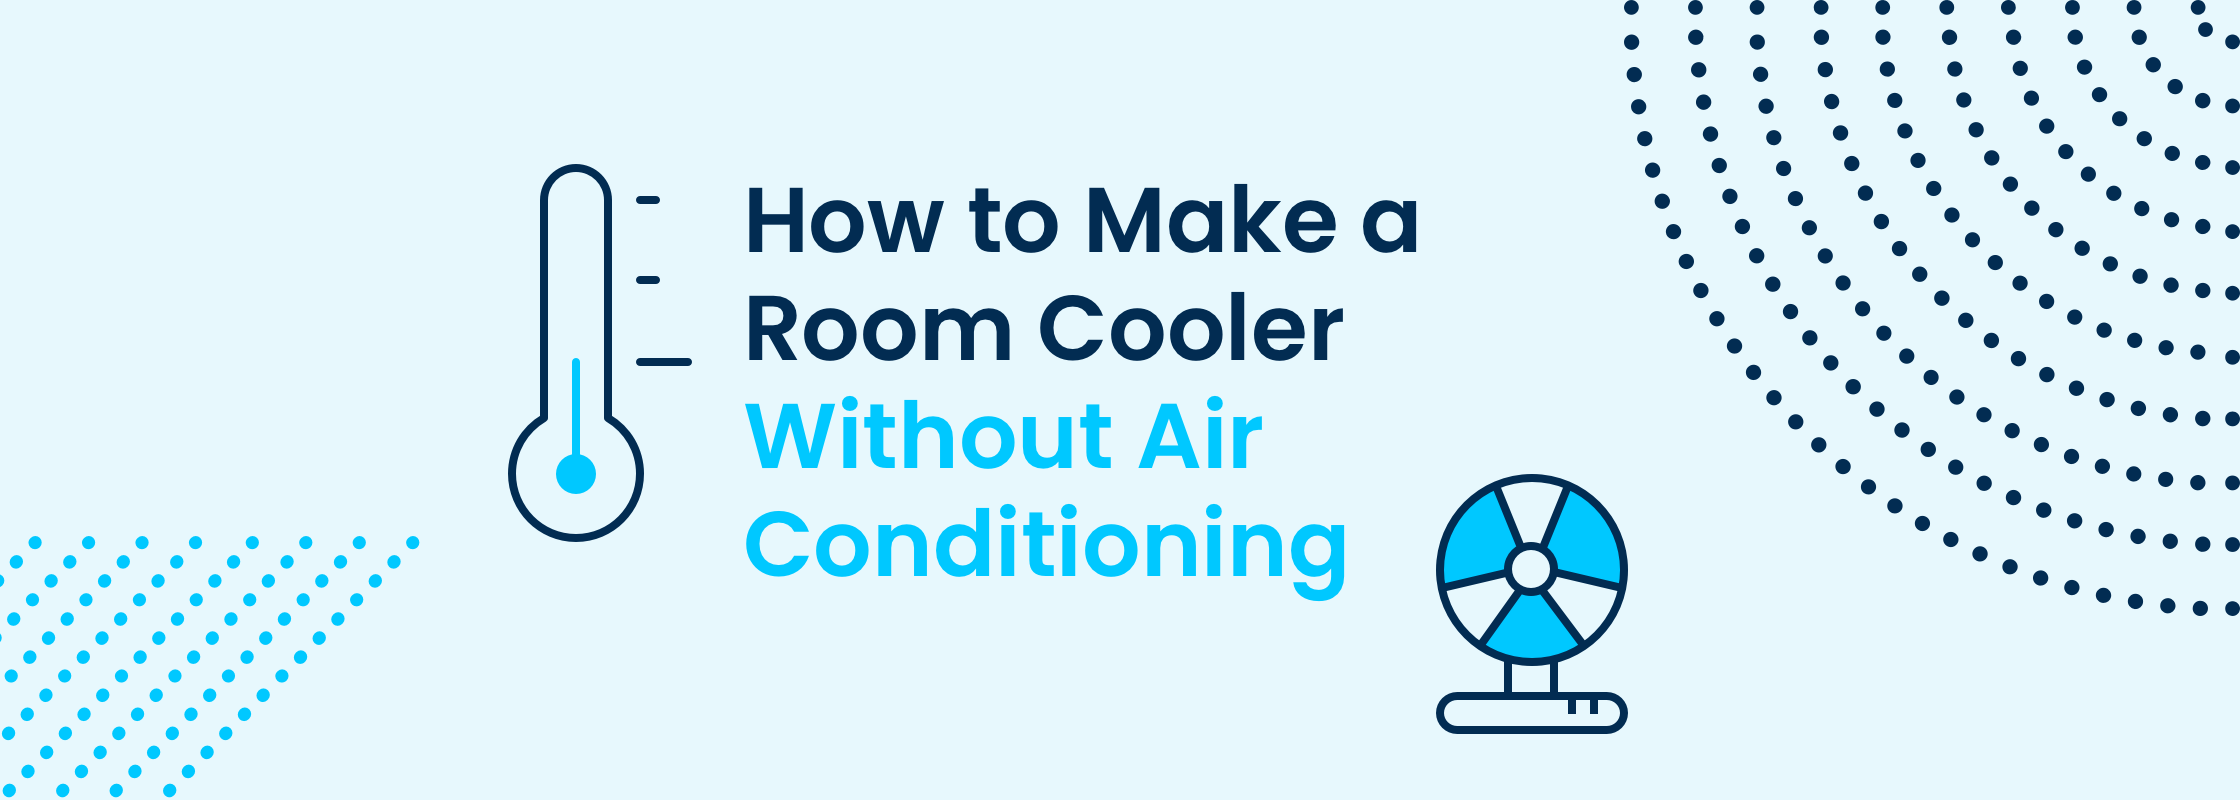 How to Make a Room Cooler Without Air Conditioning